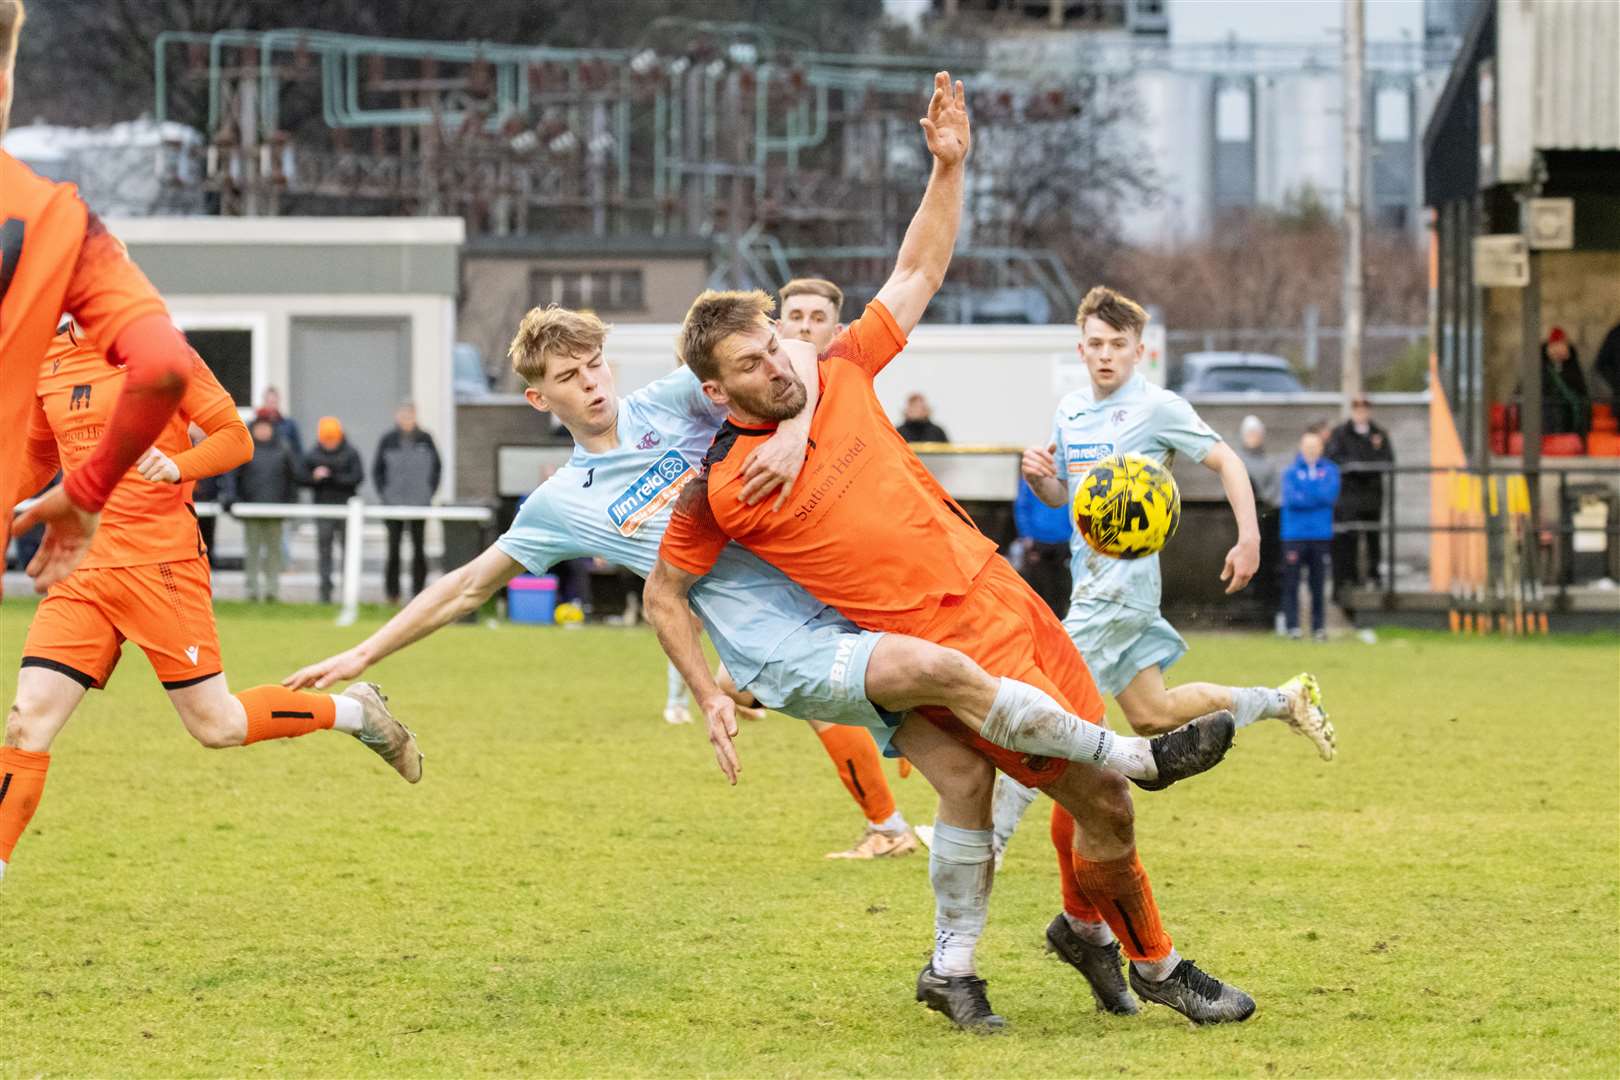 Rothes' Gary Kerr and Keith's Lewis Coull tussle for the ball. ..Rothes F.C. (0) v Keith F.C. (0) at Mackessack Park, Rothes, Highland Football League 23/24...Picture: Beth Taylor.